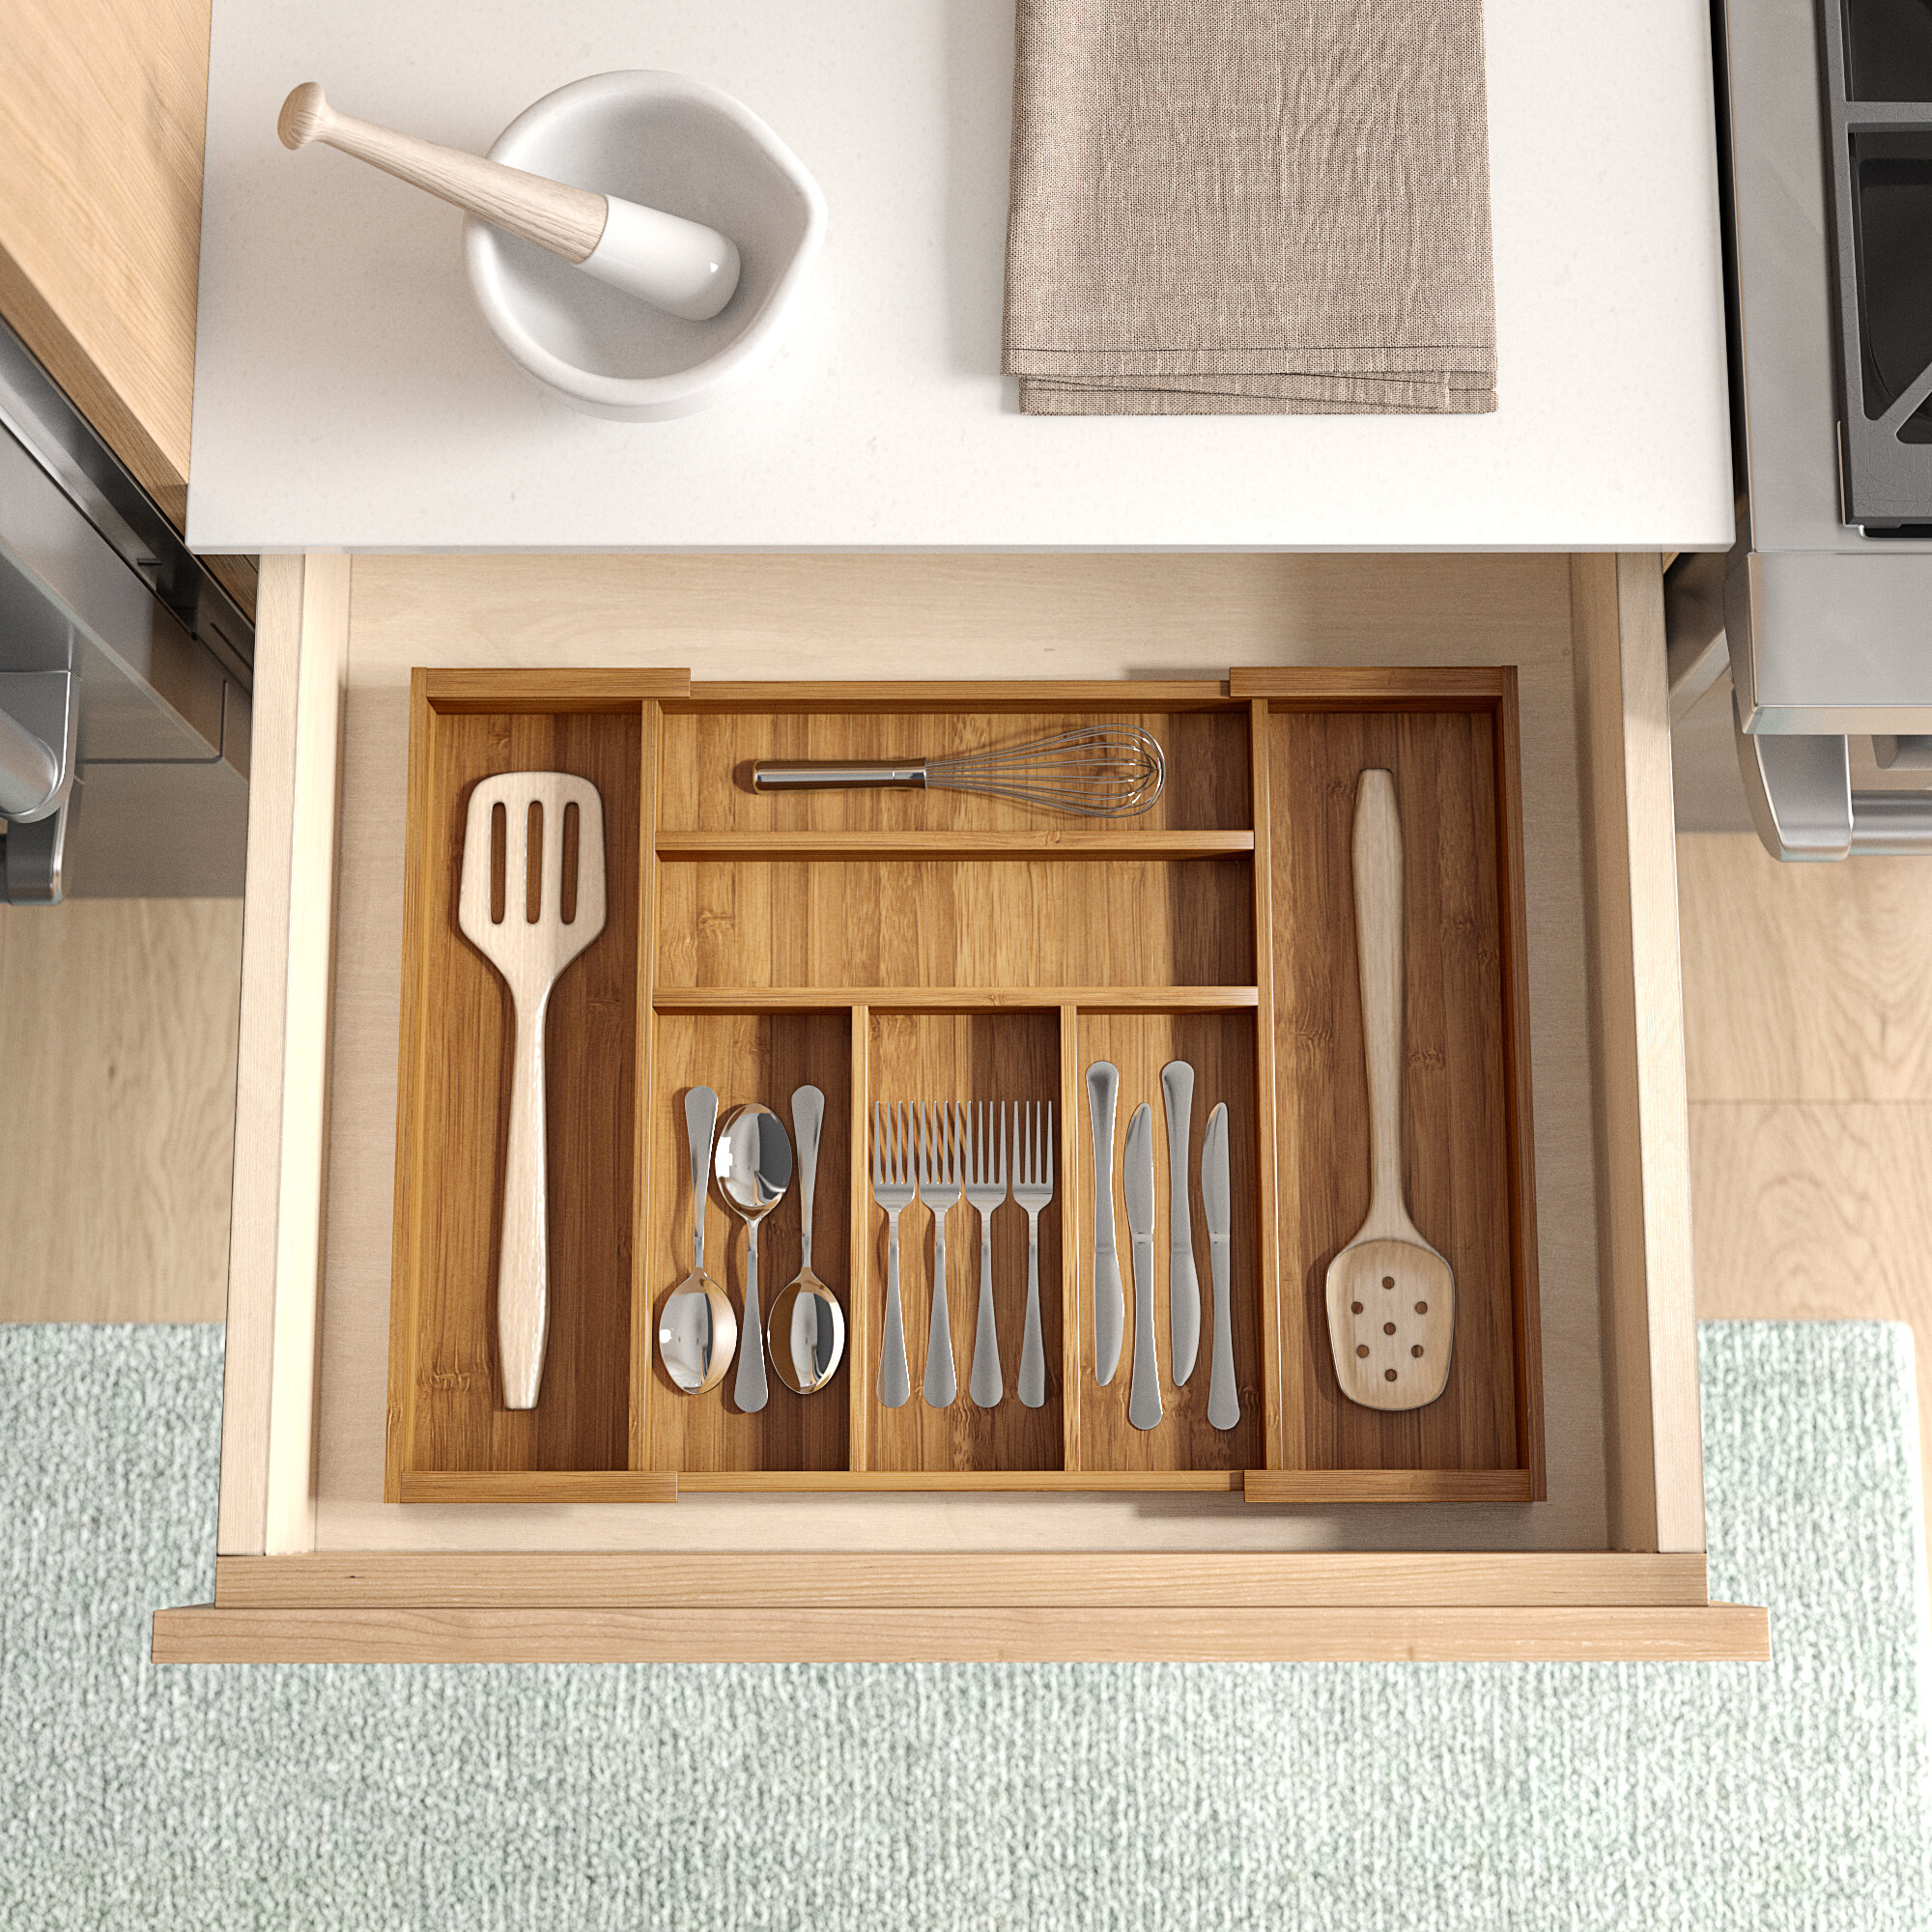 https://visualhunt.com/photos/title/3-expert-tips-to-choose-drawer-organizers.jpg